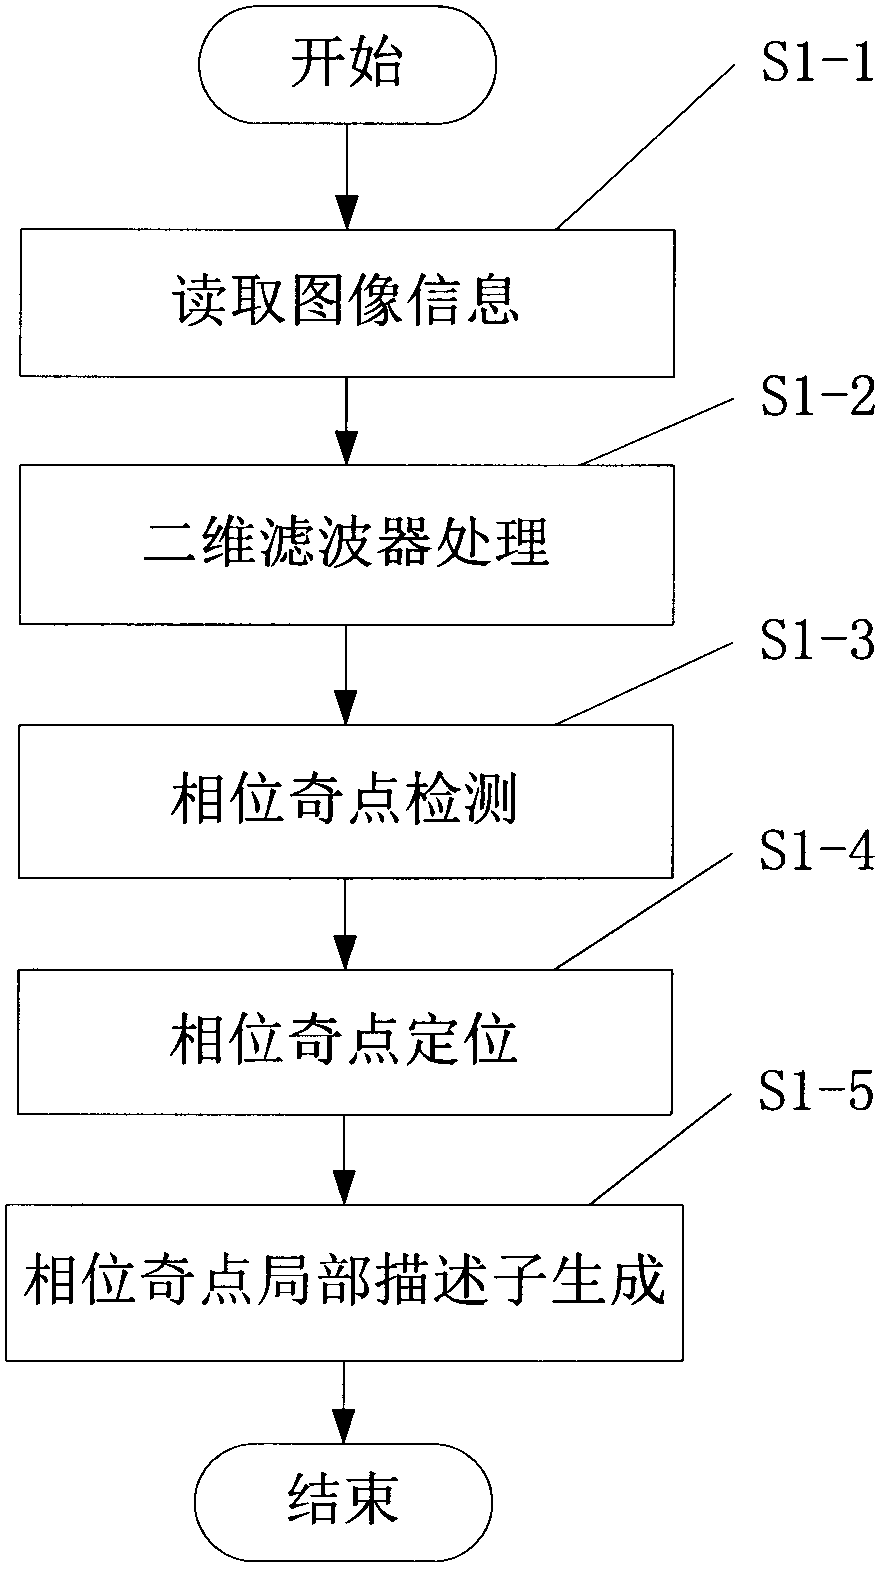 Image representation method and applications thereof in image matching and recognition